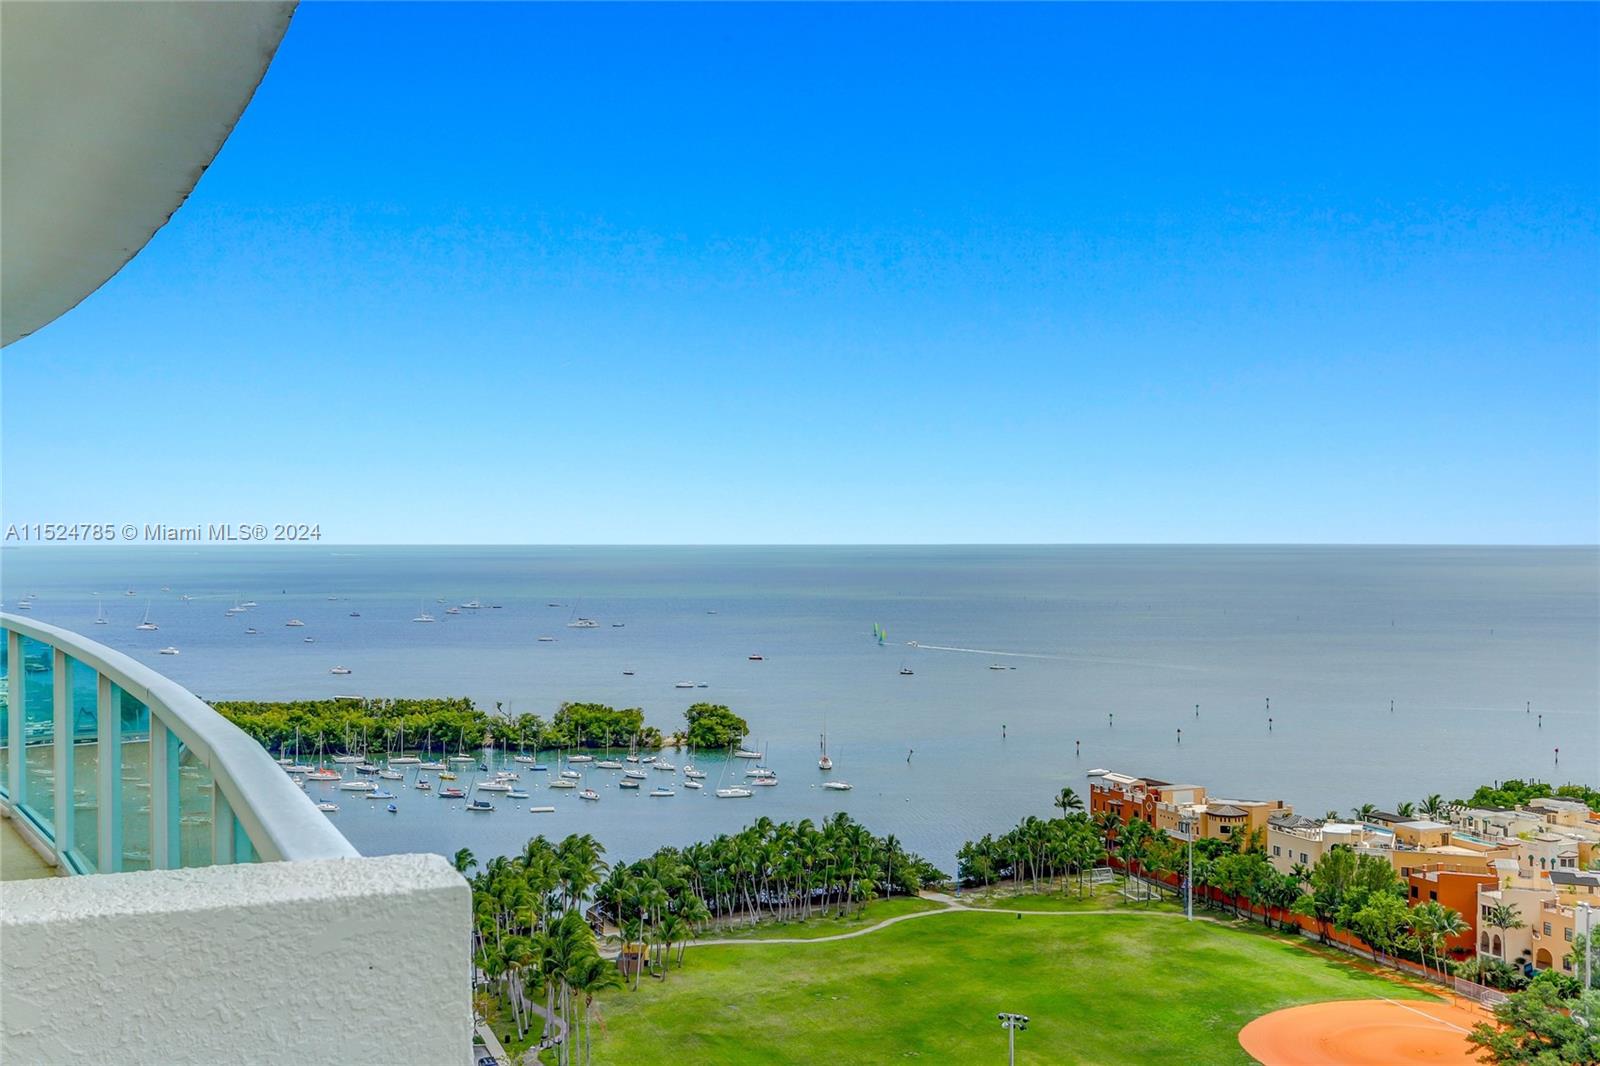 Spectacular bay views from this stunning corner residence w/wrap-around balcony in Arya, a full-service luxury condo/hotel in the heart of the Coconut Grove village. Walk to galleries, boutiques, cafes & bayfront parks. Updated, light-filled interiors & a split-plan layout w/option to live in as a 3BR/3.5BA + kitchen or rent as 3 separate units (two 1BR/1BA) + a (1BR/1.5BA + kitchen). No rental restrictions. Offered fully furnished w/chic designer pieces for the ultimate in turn-key living. Exceptional building amenities: pool & restaurant overlooking the bay, fitness center w/sauna, squash courts, business center & 24 hr. attended lobby w/concierge. Secure garage parking (2 assigned spaces) as well as valet & street parking. Minutes to downtown, MIA, Brickell, Key Biscayne & the Beaches.